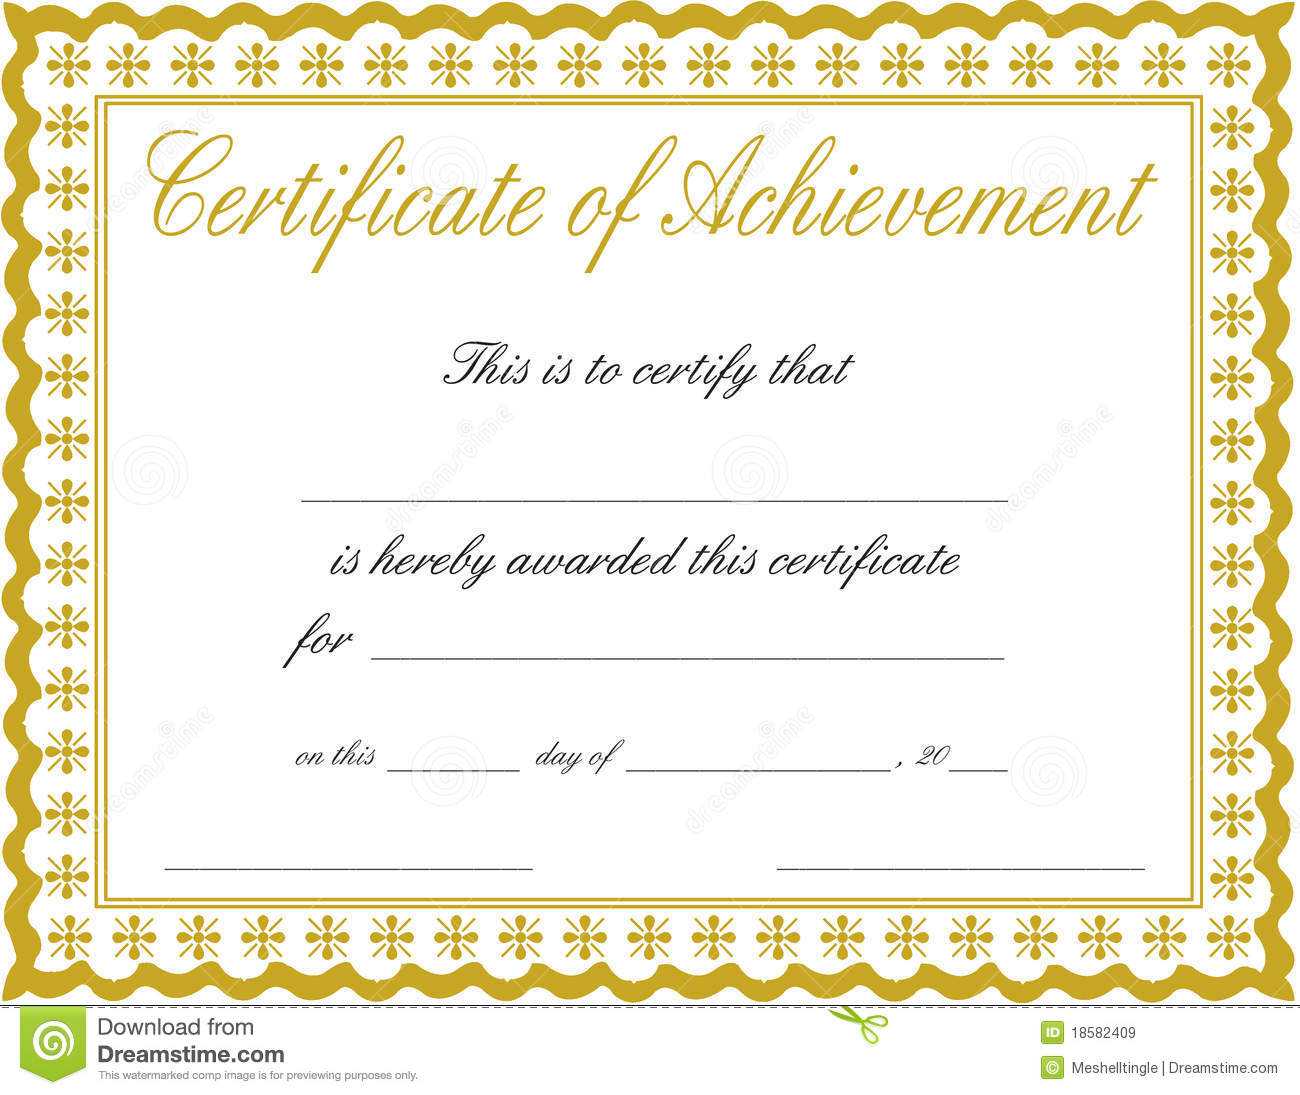 Certificate Of Achievement Stock Image. Image Of Colored Throughout Certificate Of Accomplishment Template Free